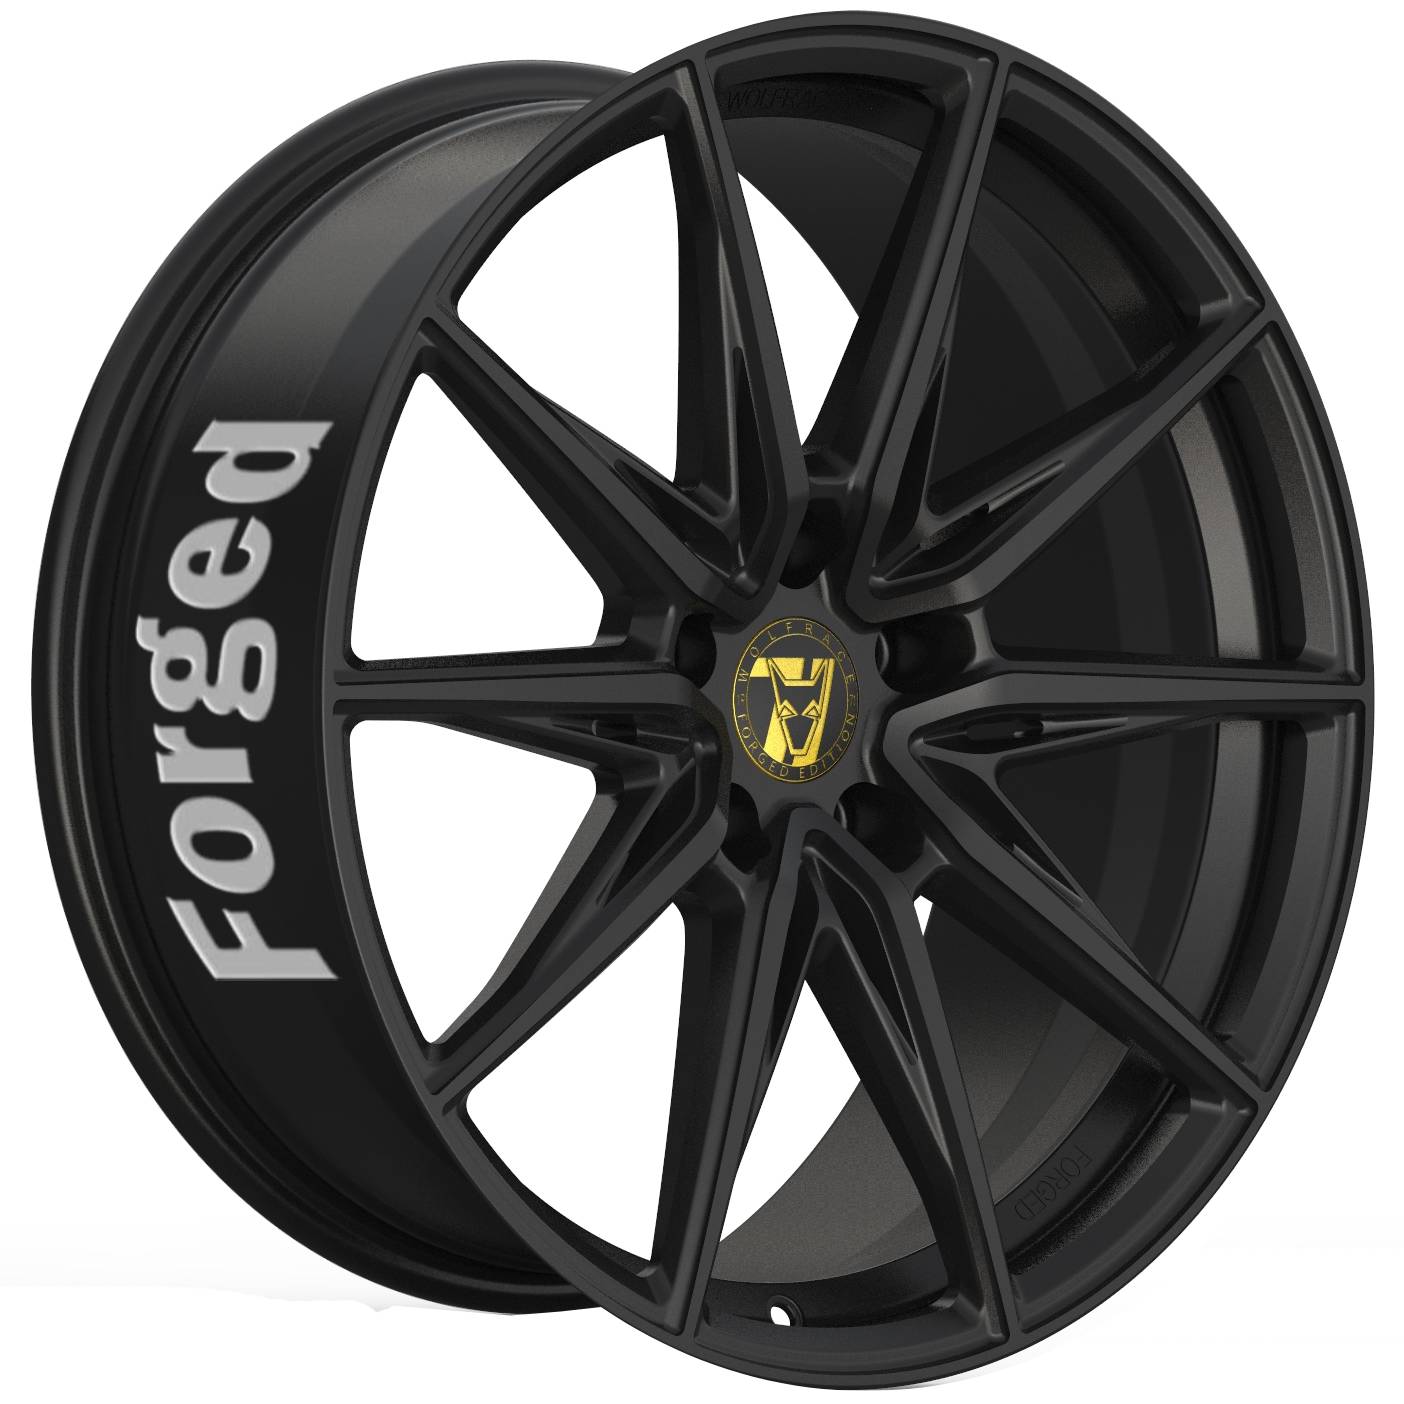 Jantes alu Demon Wheels 71 Forged Edition Urban Racer Forged [13x23] -5x112- ET 40